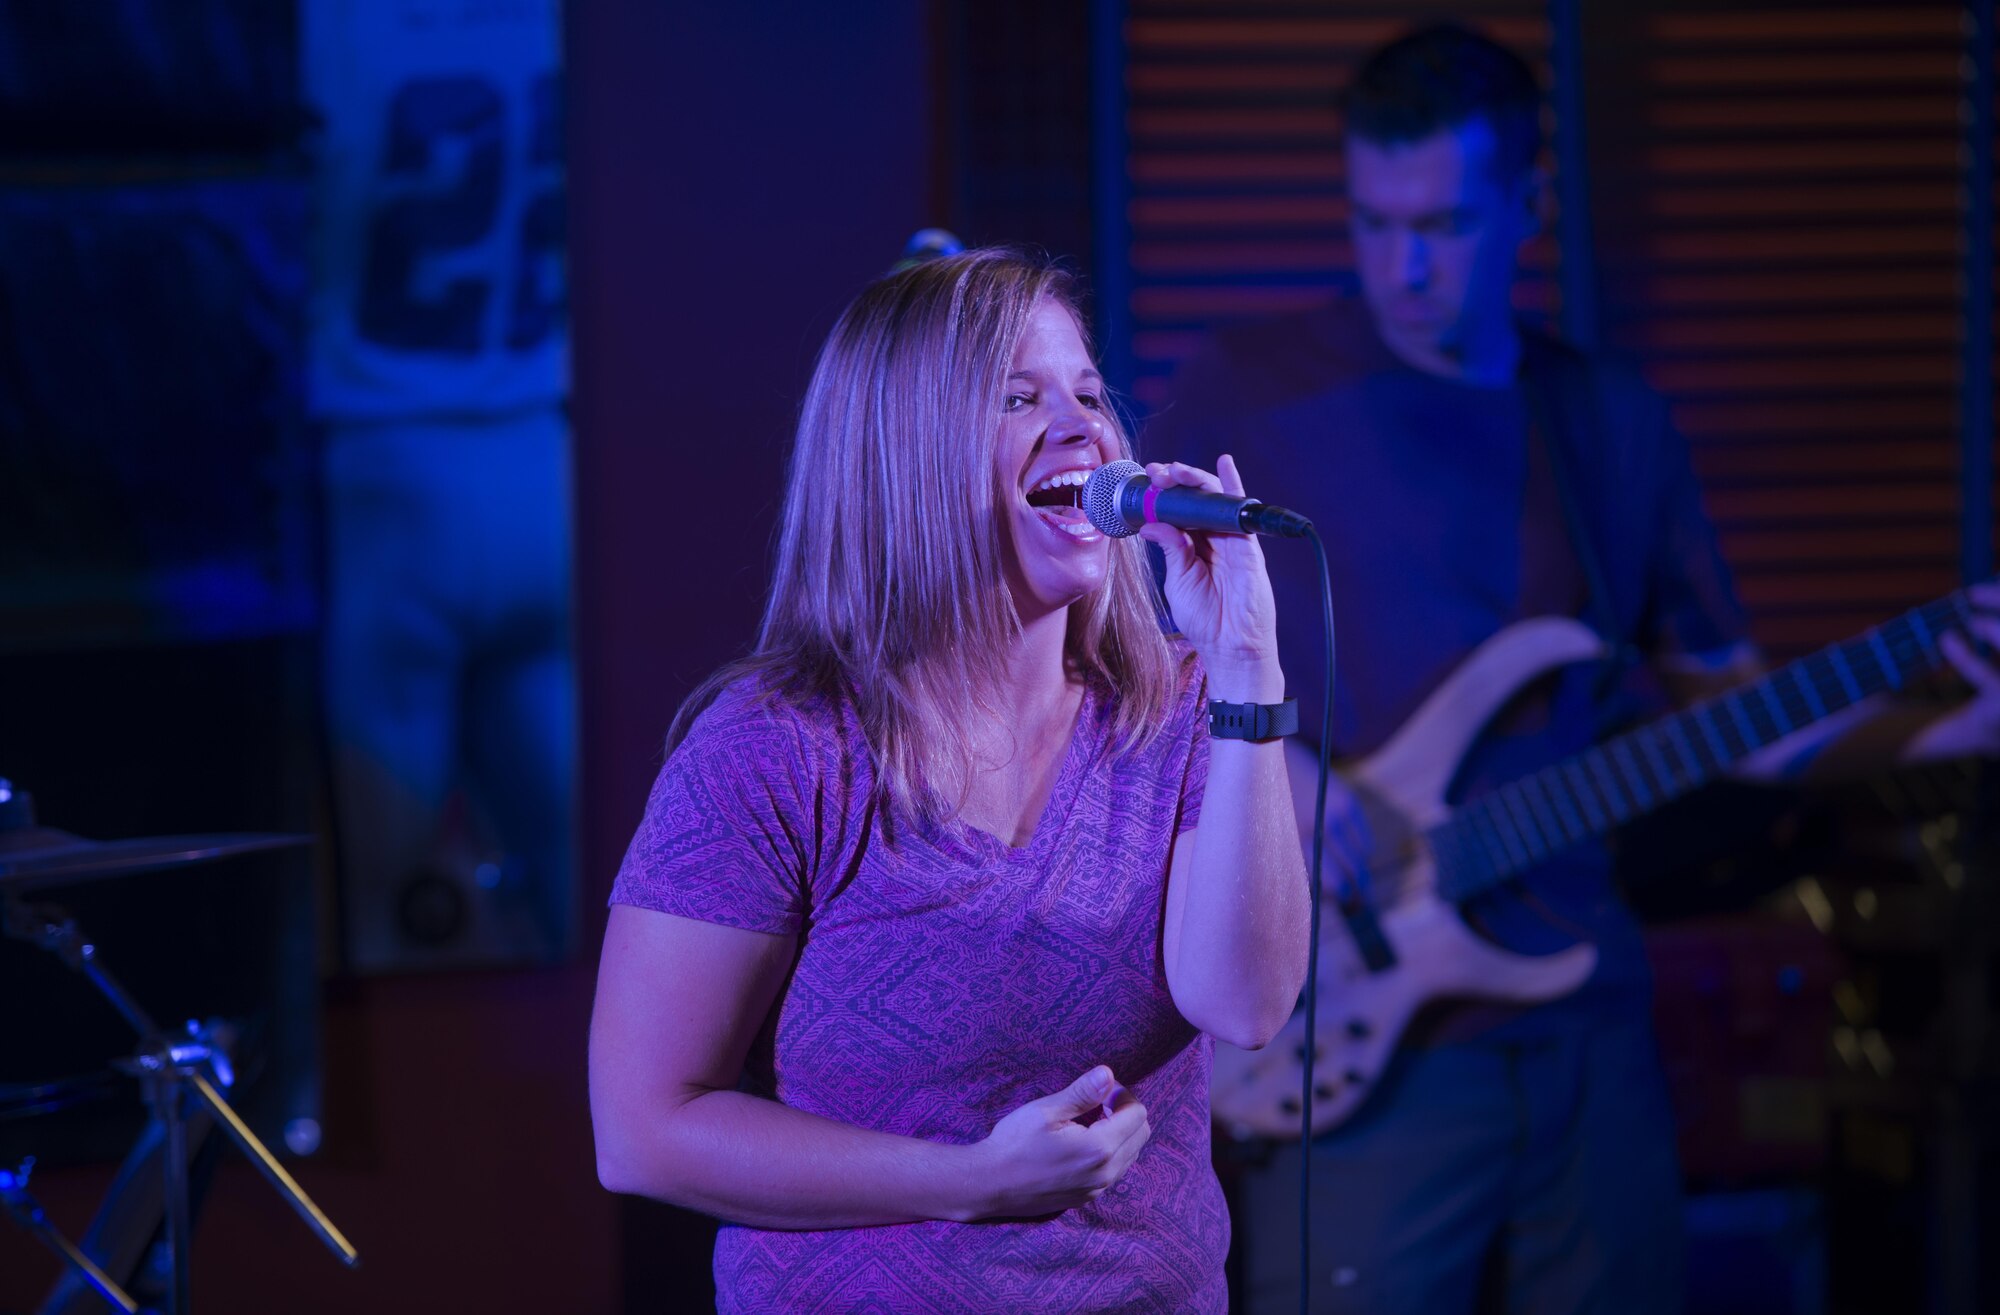 Senior Airman Melissa Lackore, a vocalist with the U.S. Air Force’s Central Command Band, Full Spectrum, performs at the Fox Sports Lounge at Al Udeid Air Base, Qatar Oct. 13, 2015. The performance was the band’s last before the group kicks off a 16-day tour. During the show, which featured hit songs “Uptown Funk,” “Beat It” and “Superstitious” the group was greeted by loud cheers from the audience. (U.S. Air Force Photo/Tech. Sgt. James Hodgman)